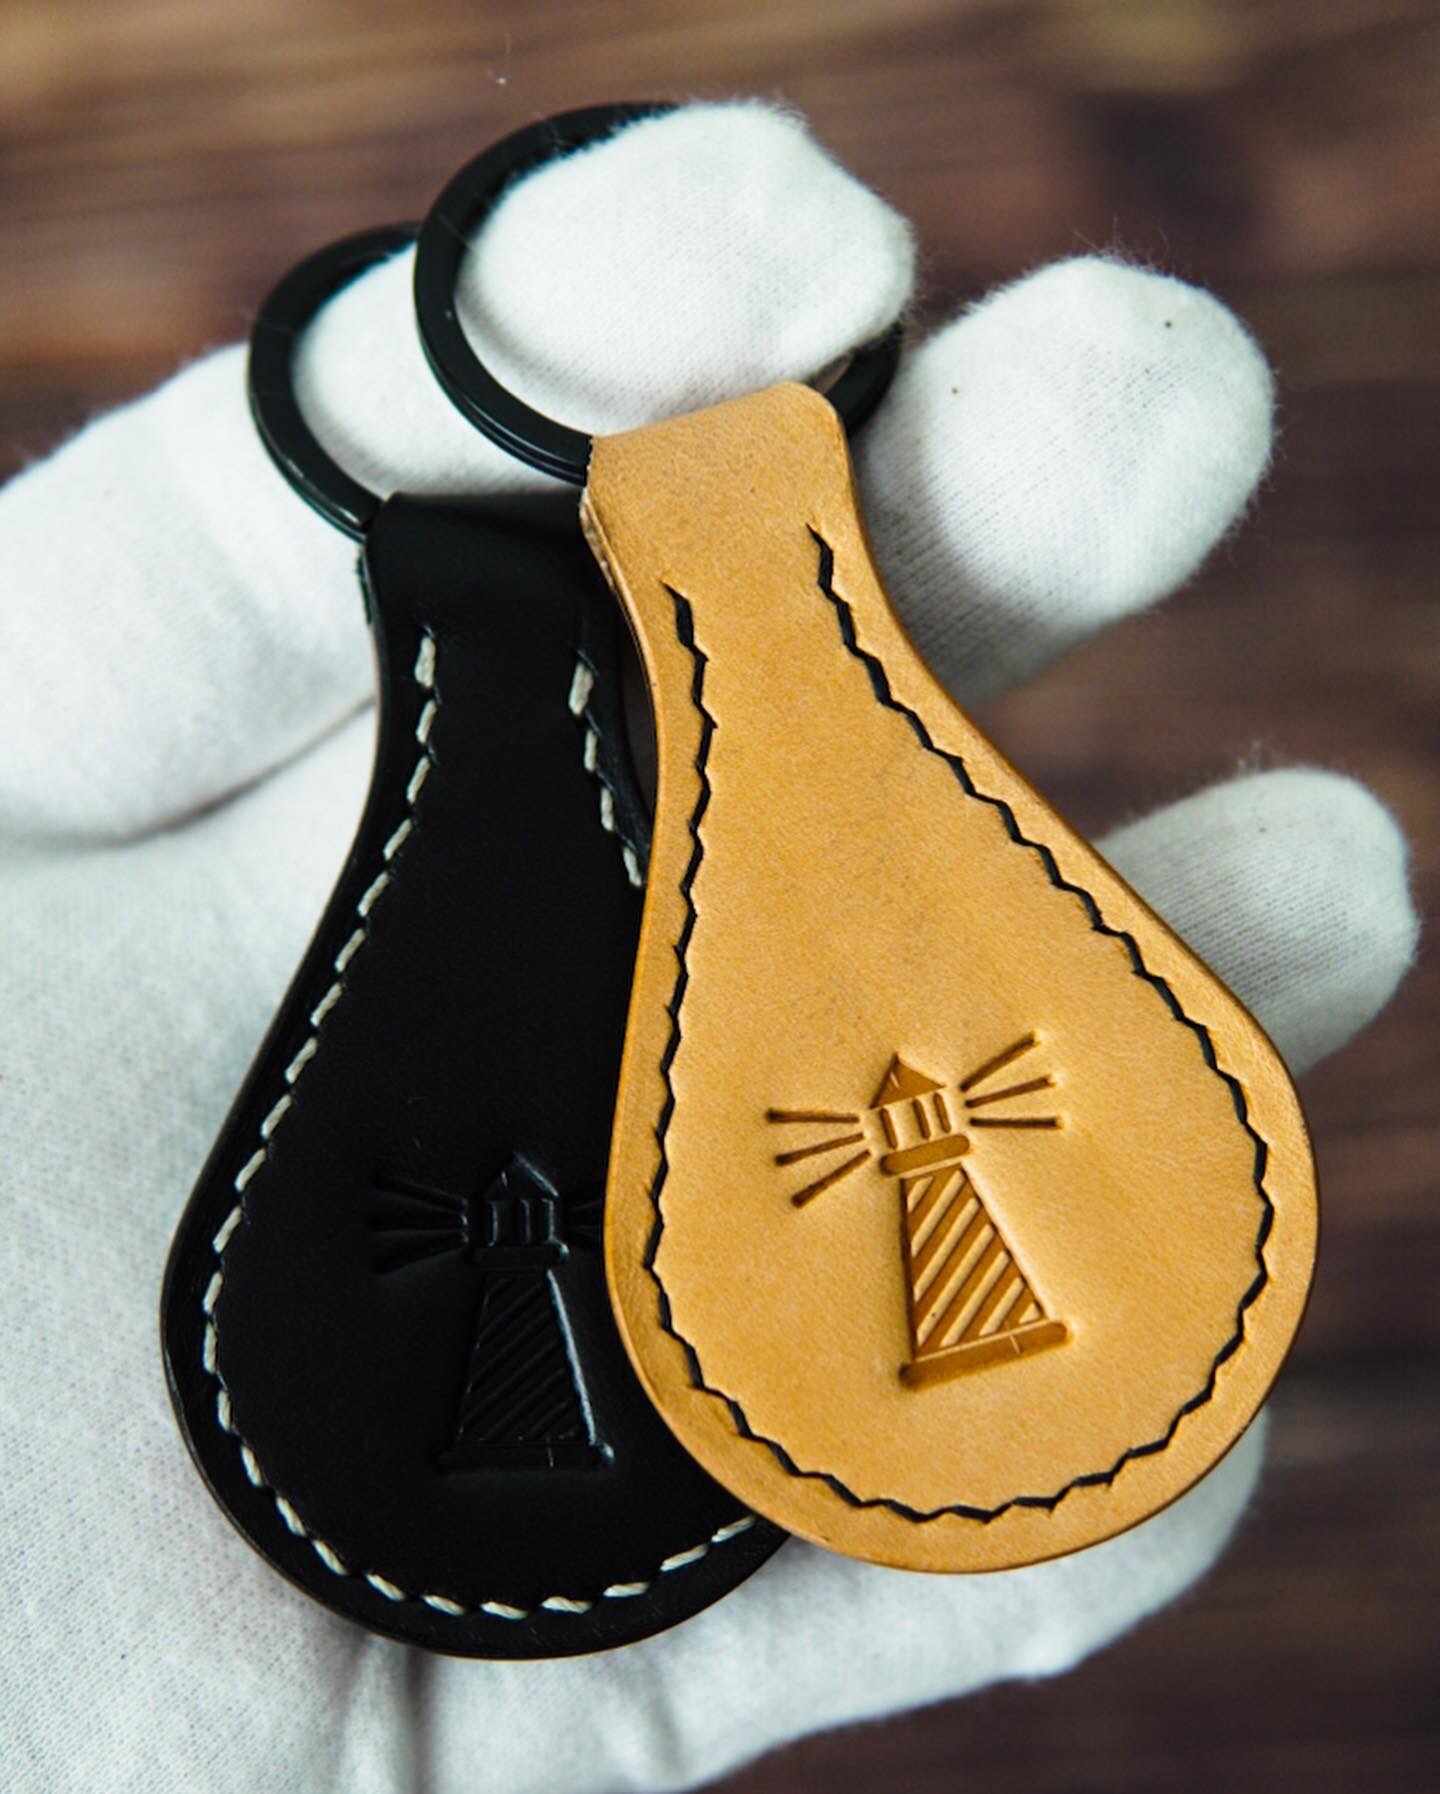 Clip key ring  Lighthouse Leather Co – Lighthouse Leather Co.